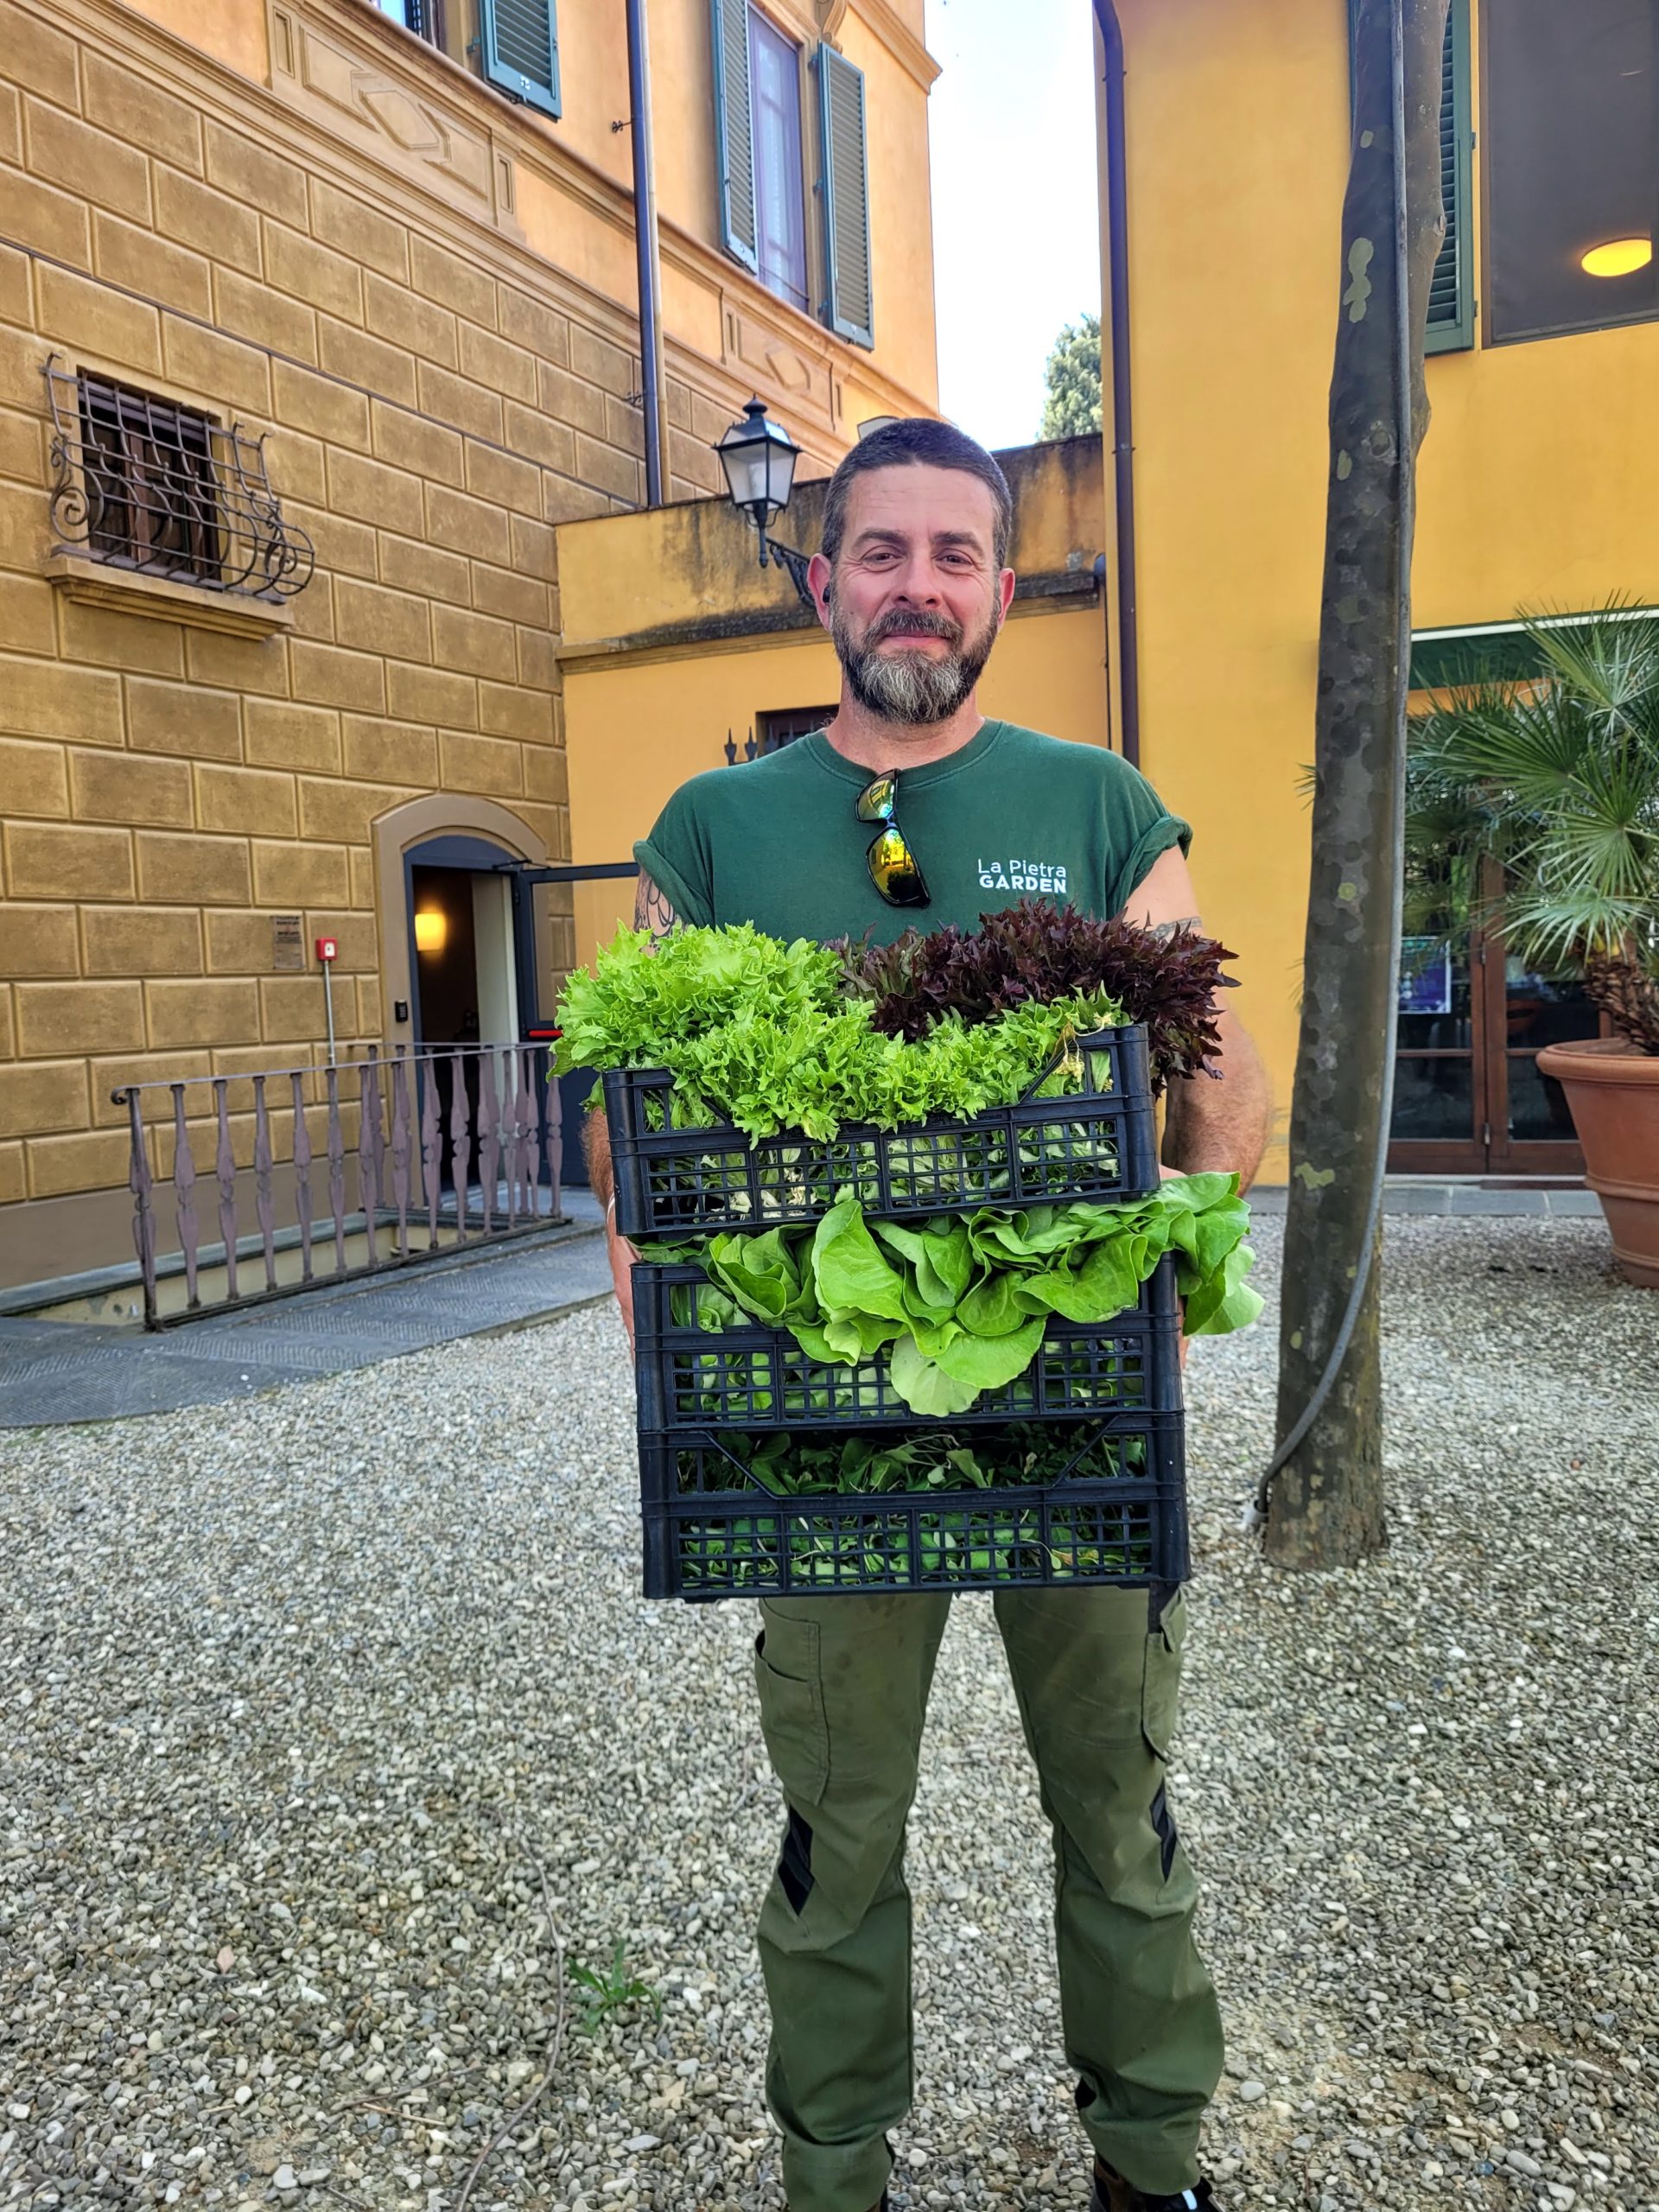 An NYU faculty member carrying fresh veggies from the Villa La Pietra garden to be used in the dining hall.